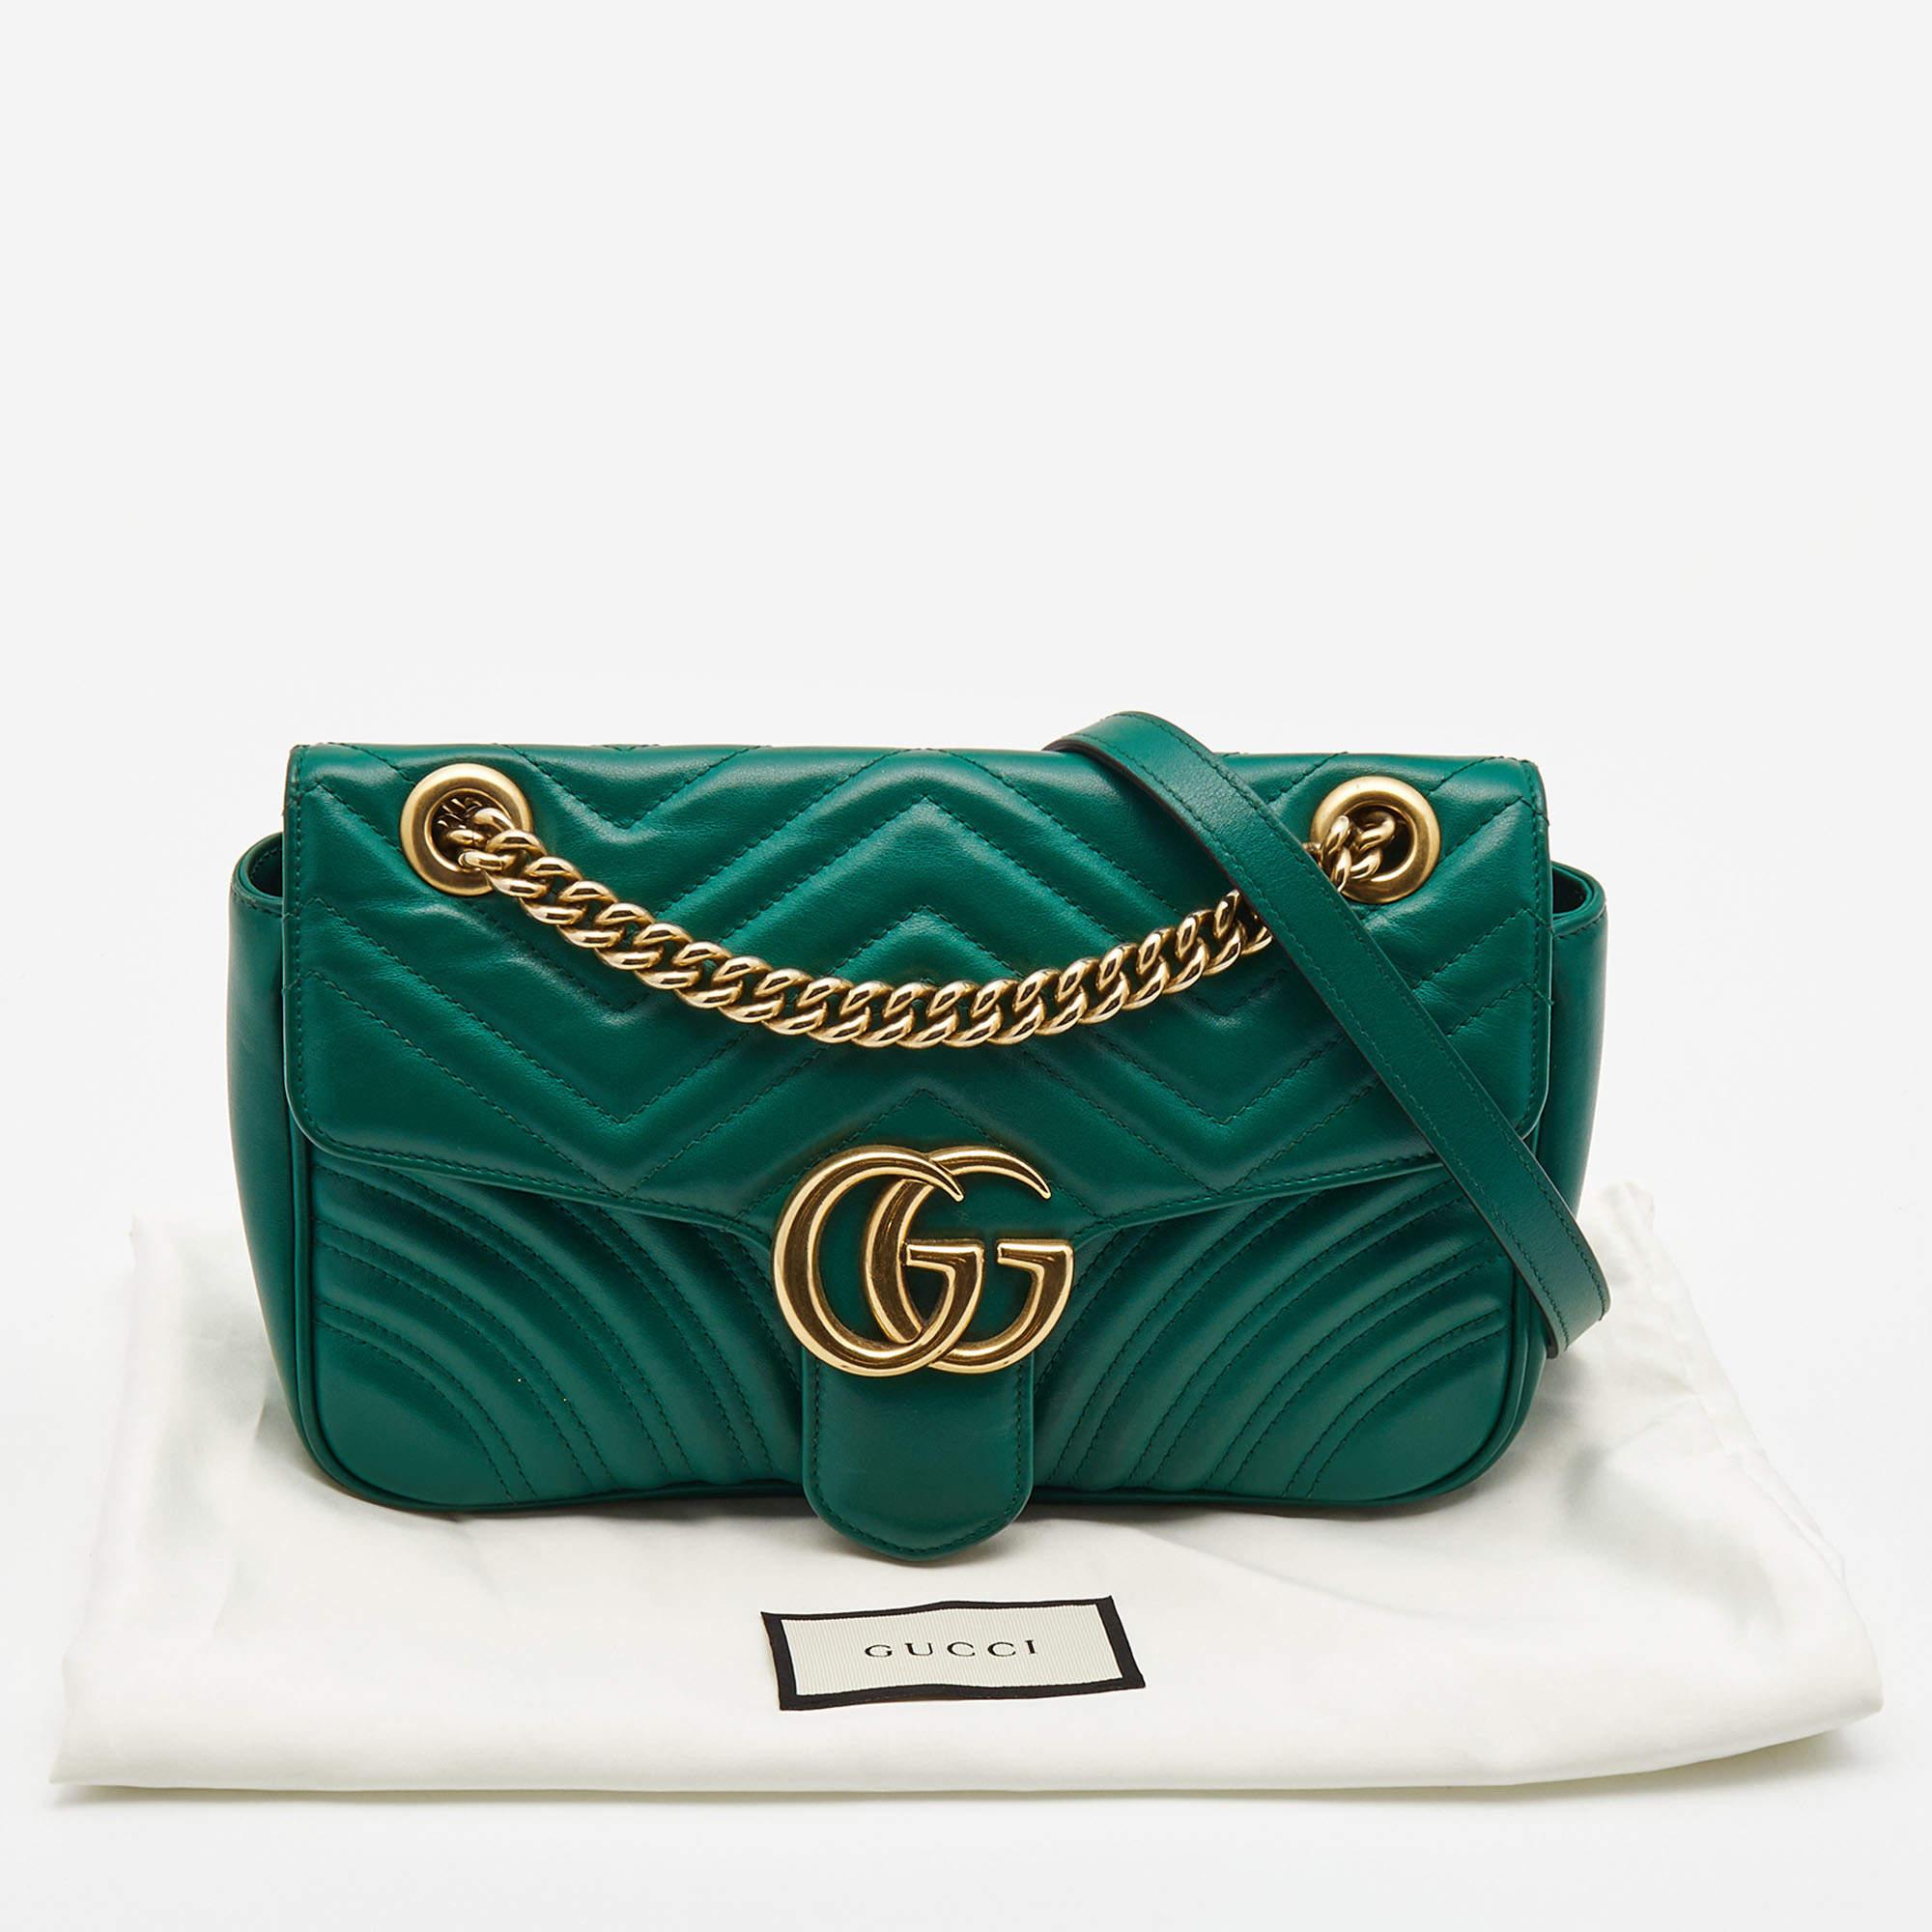 Gucci Green Matelasse Leather Small GG Marmont Shoulder Bag 8